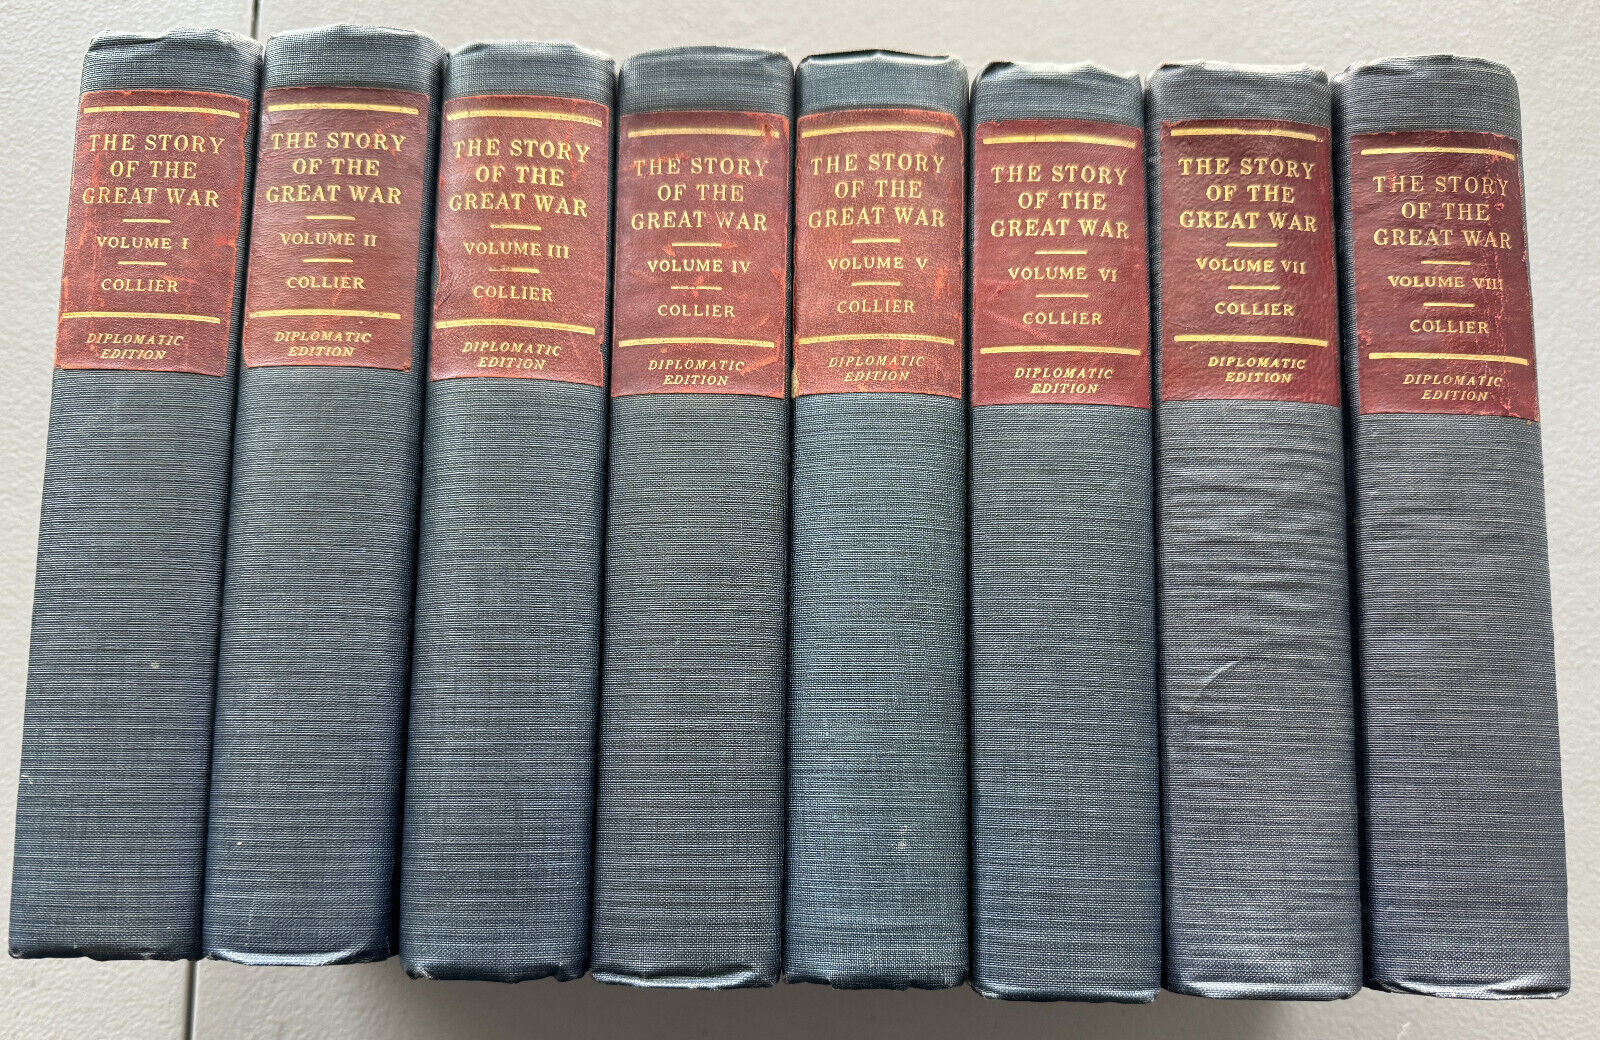 The Story of the Great War, Collier Diplomatic Edition, 8 Volume Set